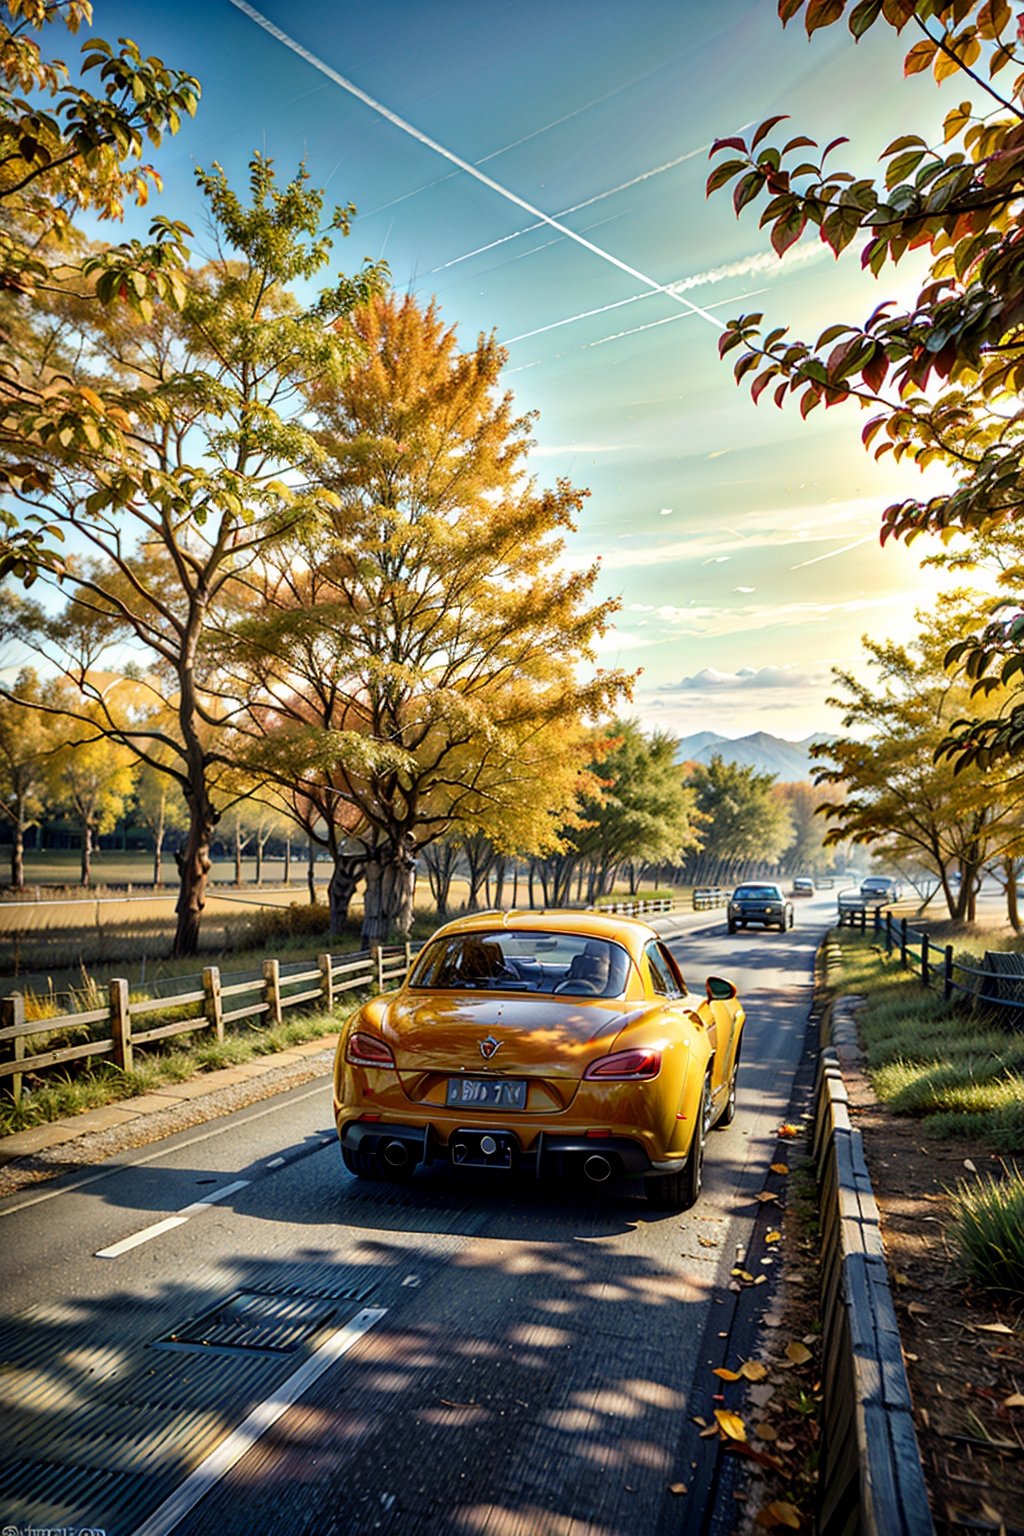 masterpiece, best quality, High resolution, Photorealism, Autumn poplar tree avenue, Poplar leaves shine in the autumn setting sun, (oblique rays), ((The road is all yellow with fallen  poplar leaves)), blue sky, (A red open car coming towards us along a row of poplar trees),The sun's rays are shining on a red convertible car from the side, ,FFIXBG,no_humans,car